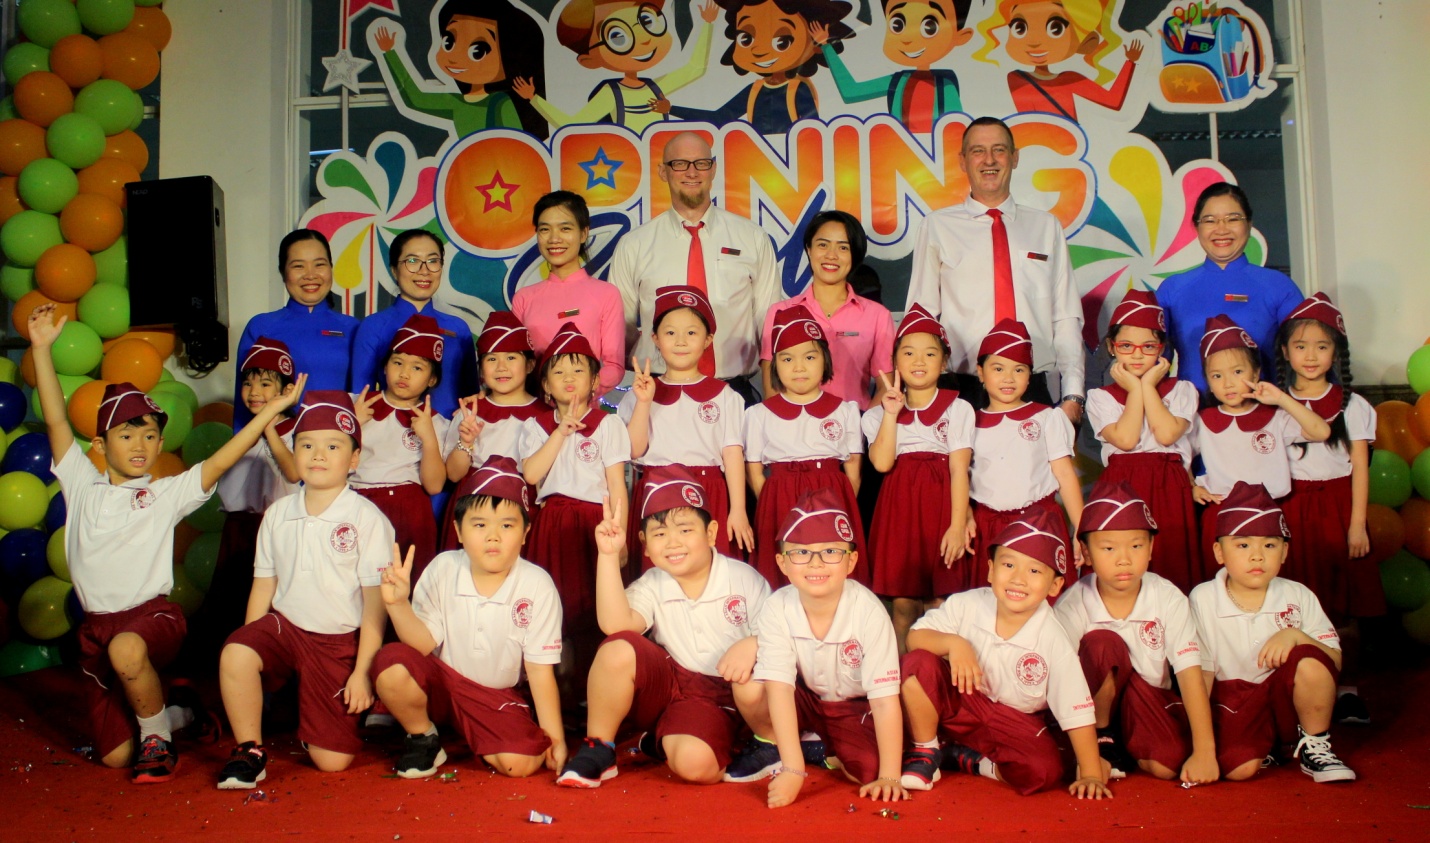 A colorful opening ceremony with 9000 students of the Asian International School.